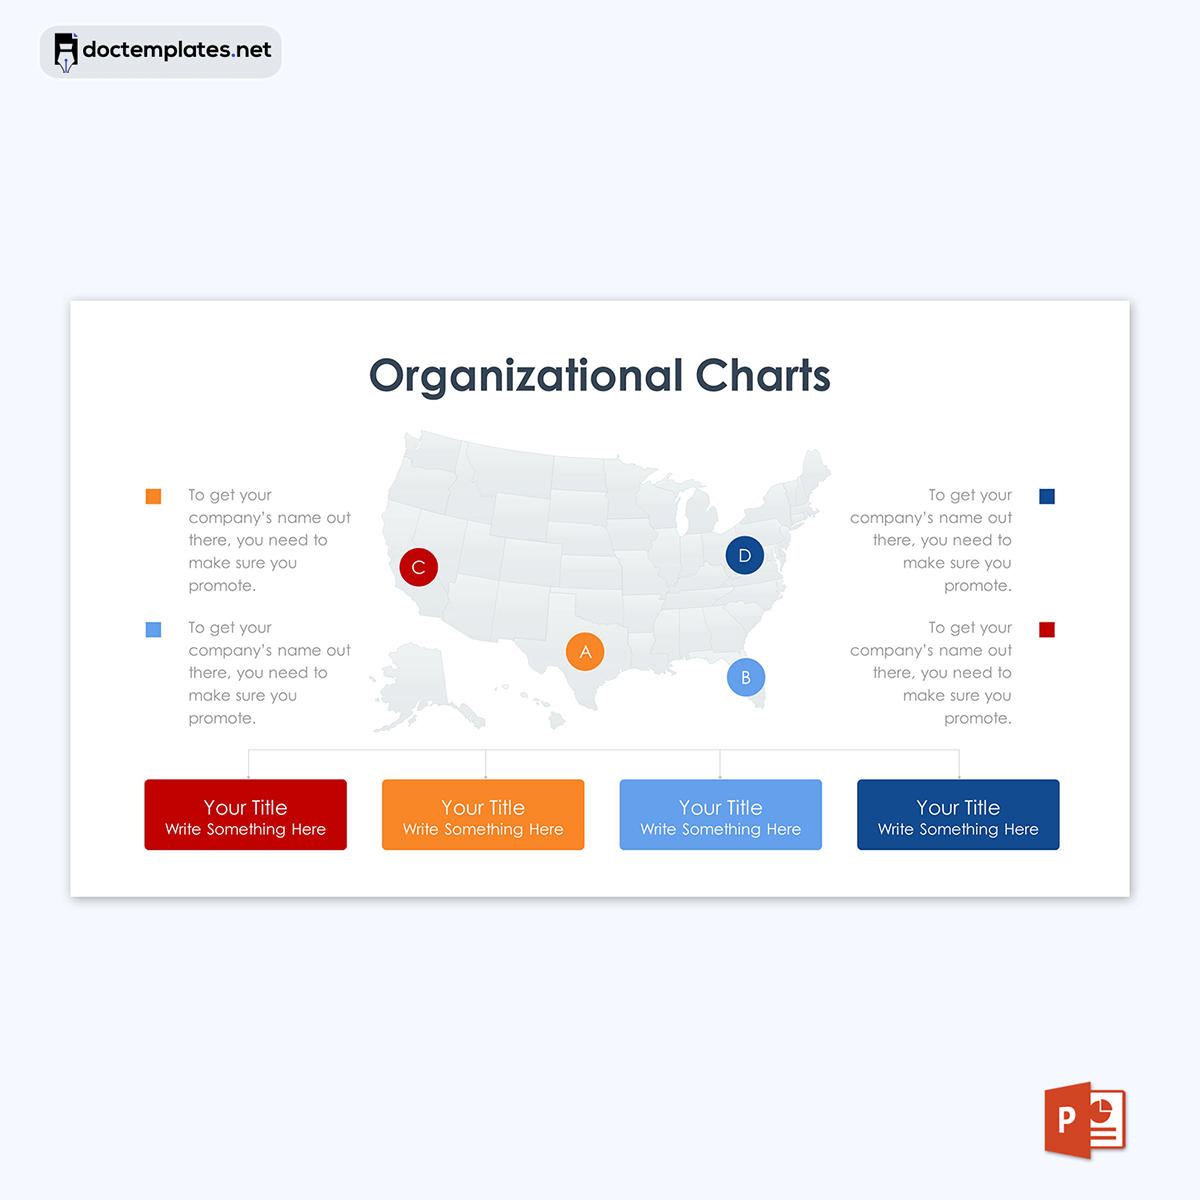 
how to create an org chart in visio from excel
01